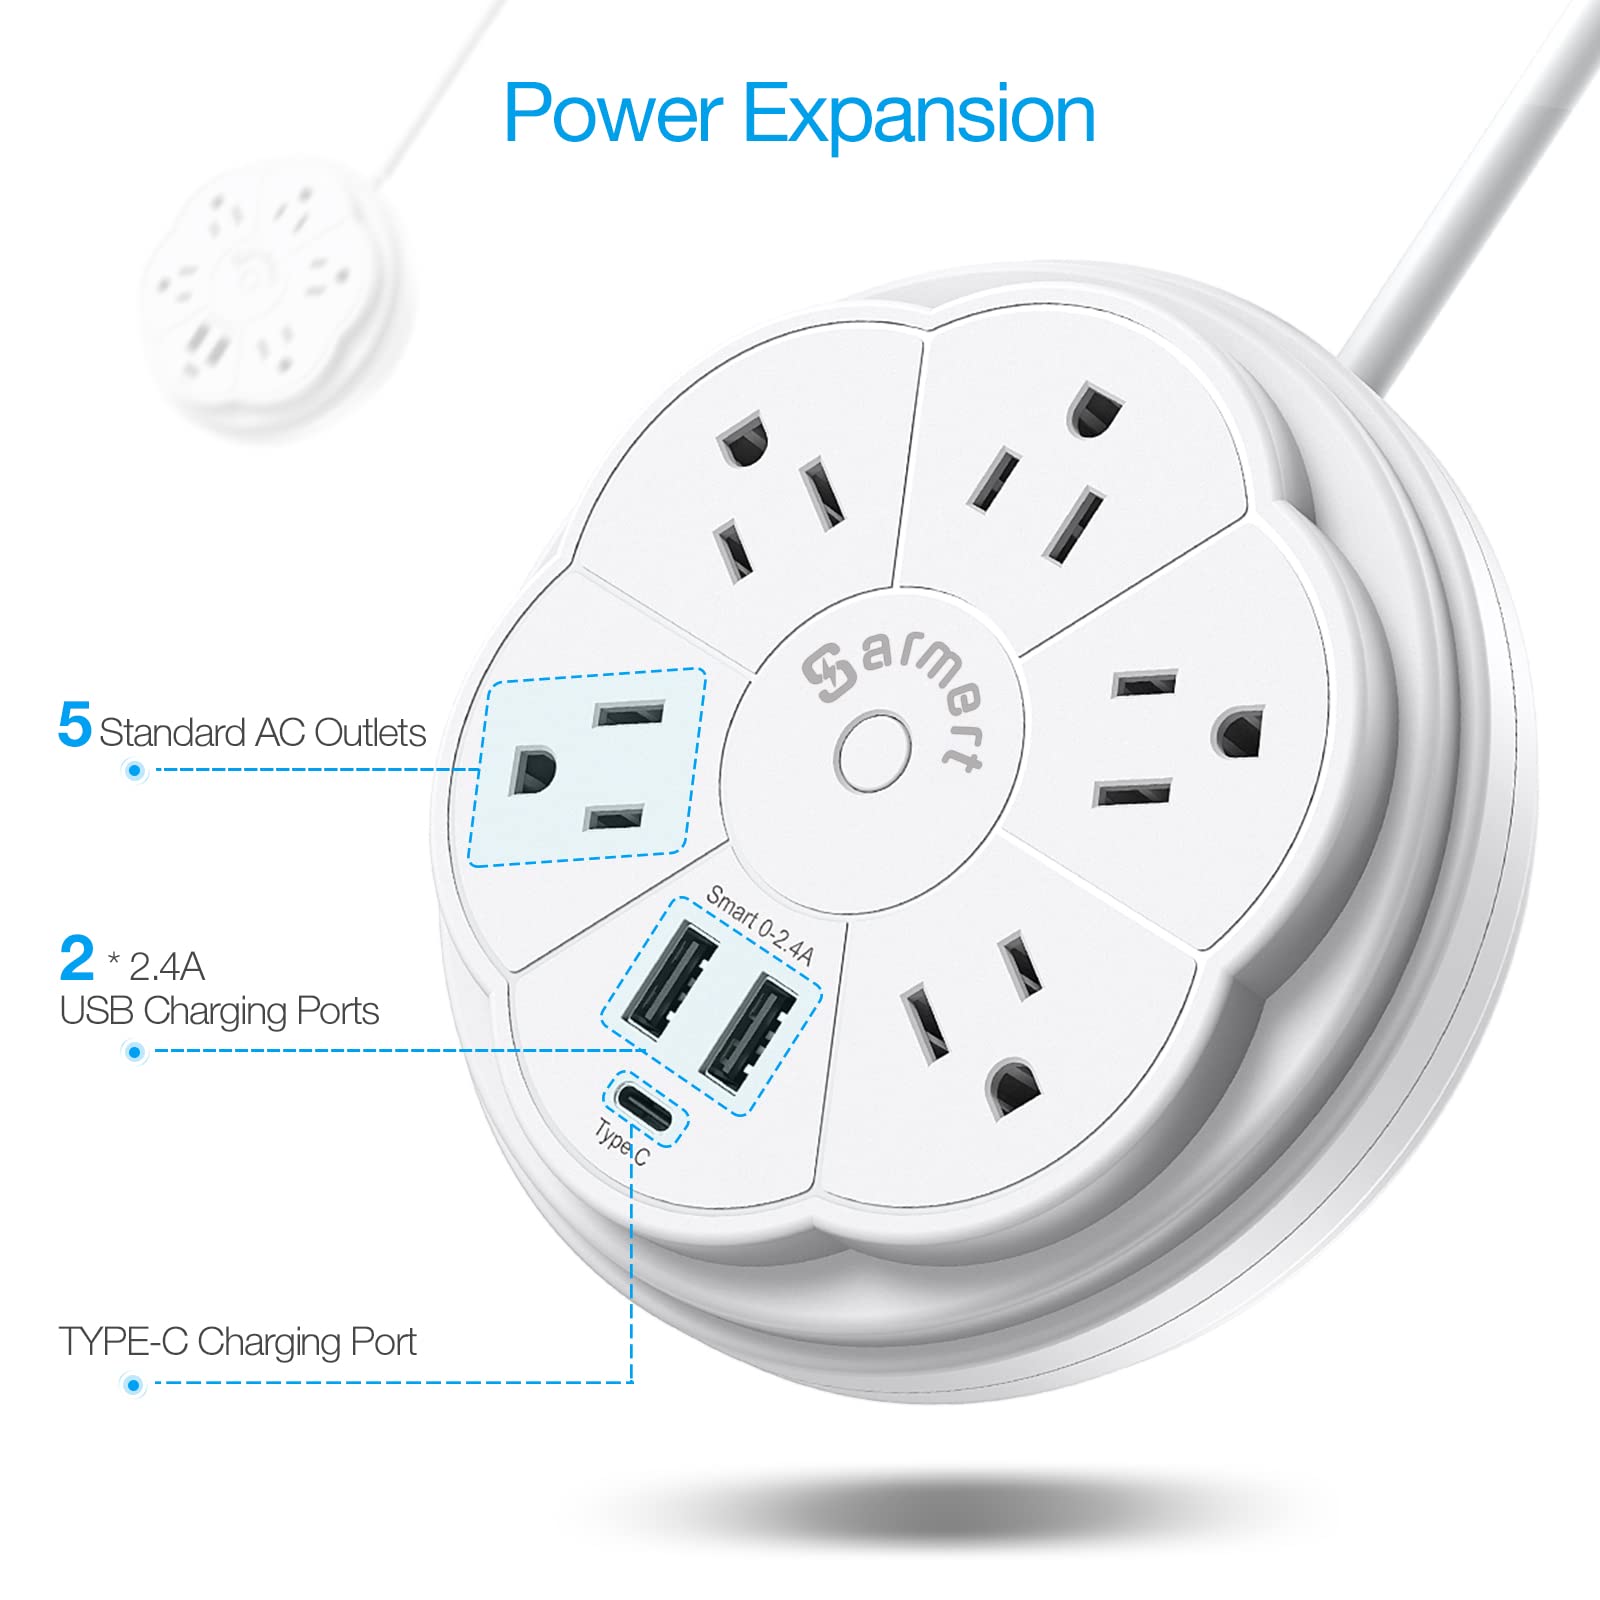 Retractable Power Strip, 5 Outlet Flat Plug Strip with Smart USB Ports and Type-C Port, 900J Surge Protector, 125V/13A, 3.3ft Retractable Extension Cord, Portable & Neat for Travel/Home/Office, White